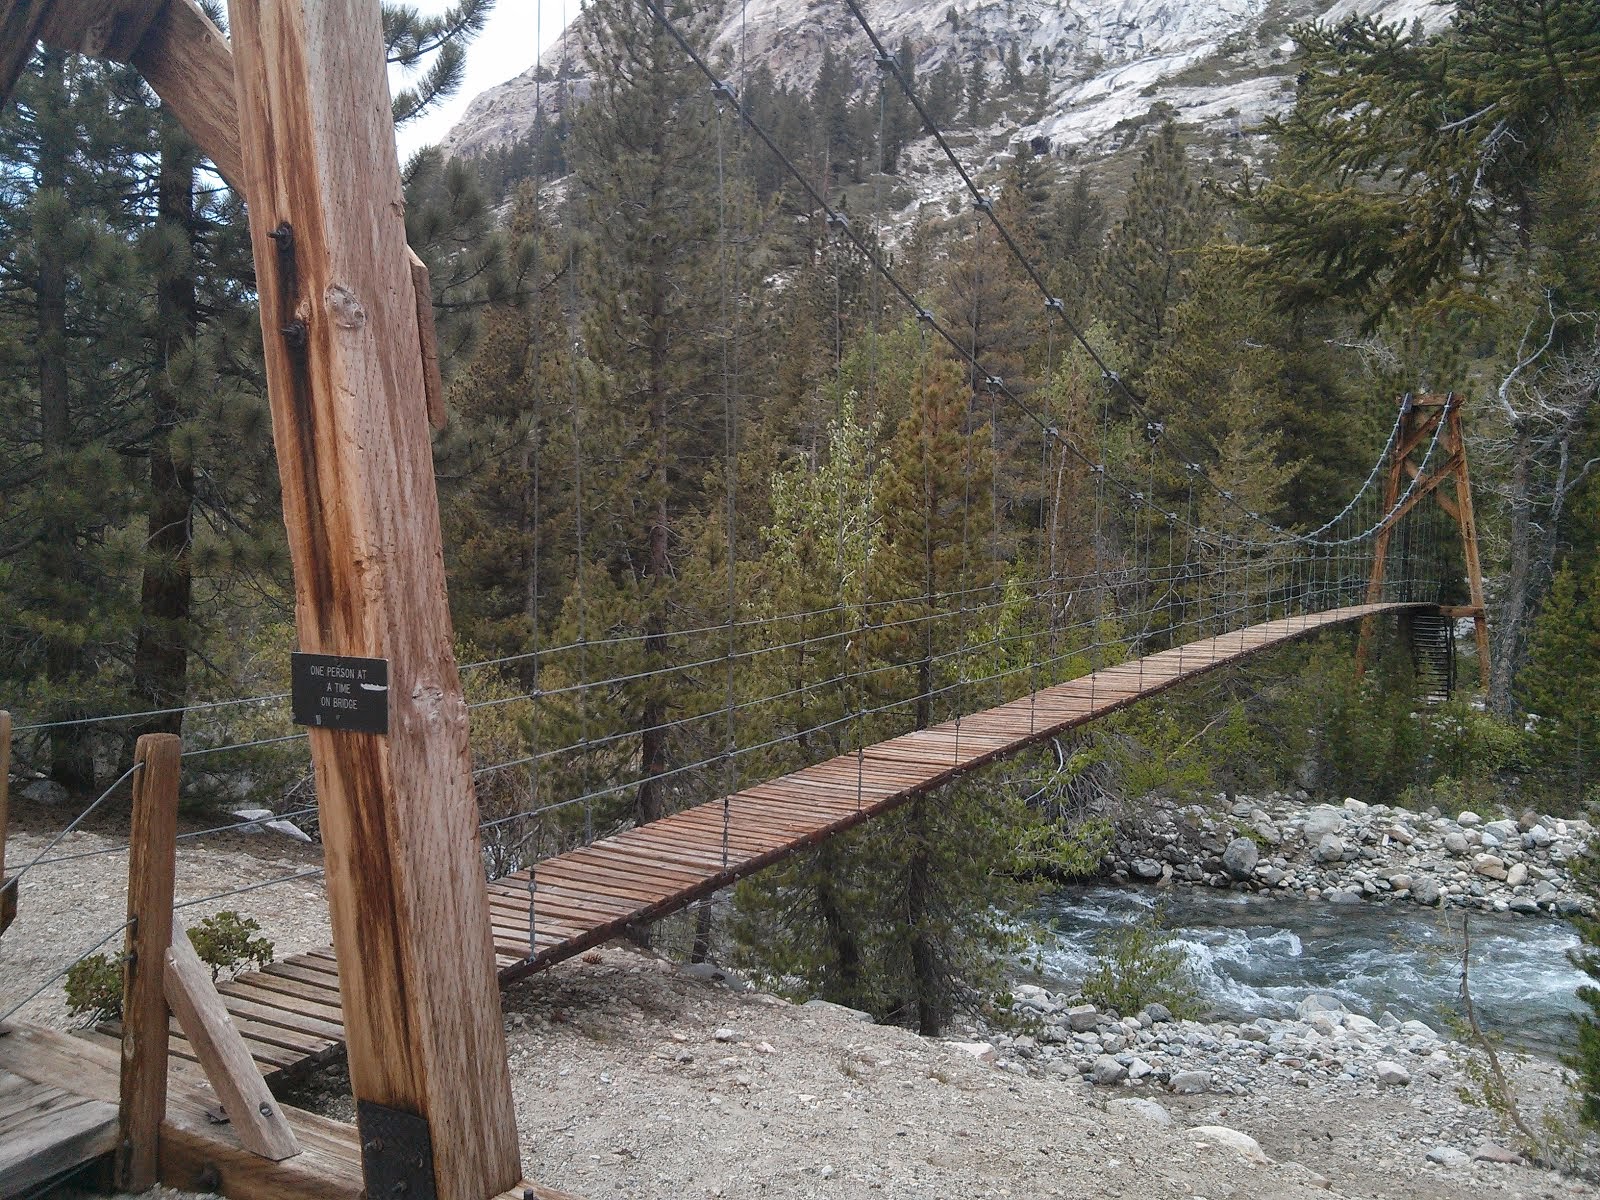 Hanging Bridge over the South Ford Woods Creek